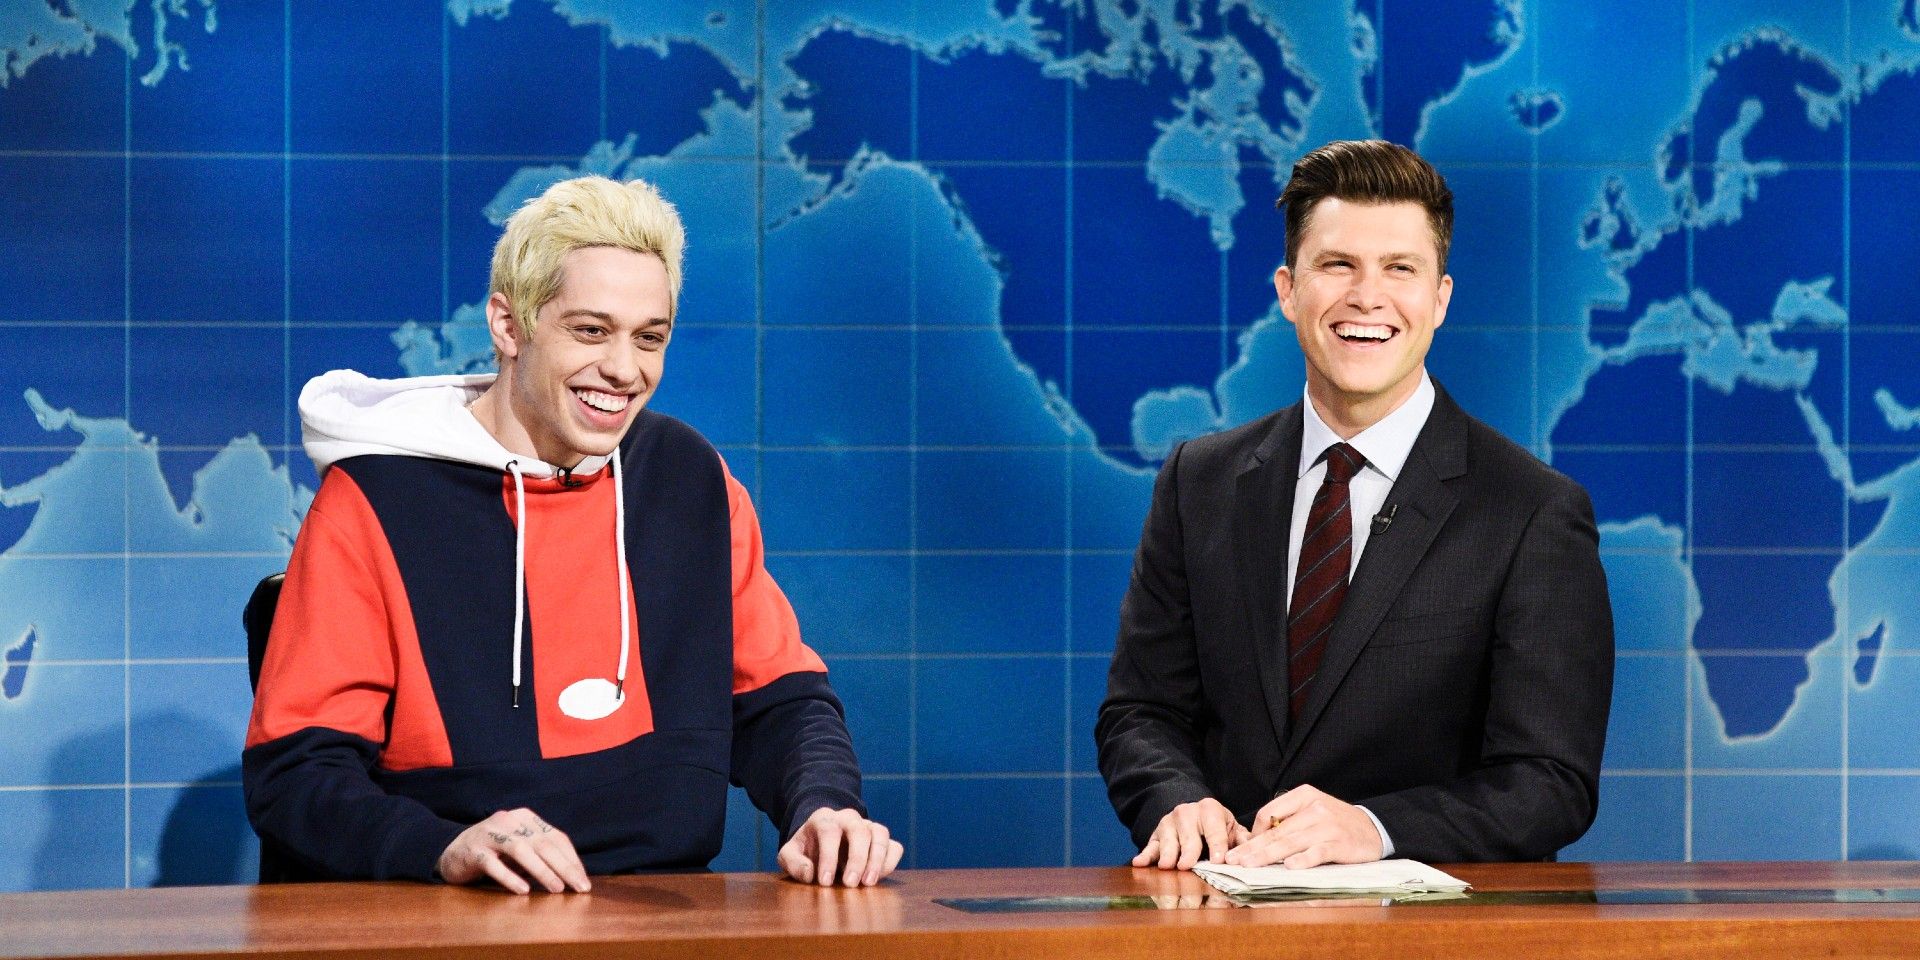 Pete Davidson and Colin Jost on Saturday Night Live Weekend Update